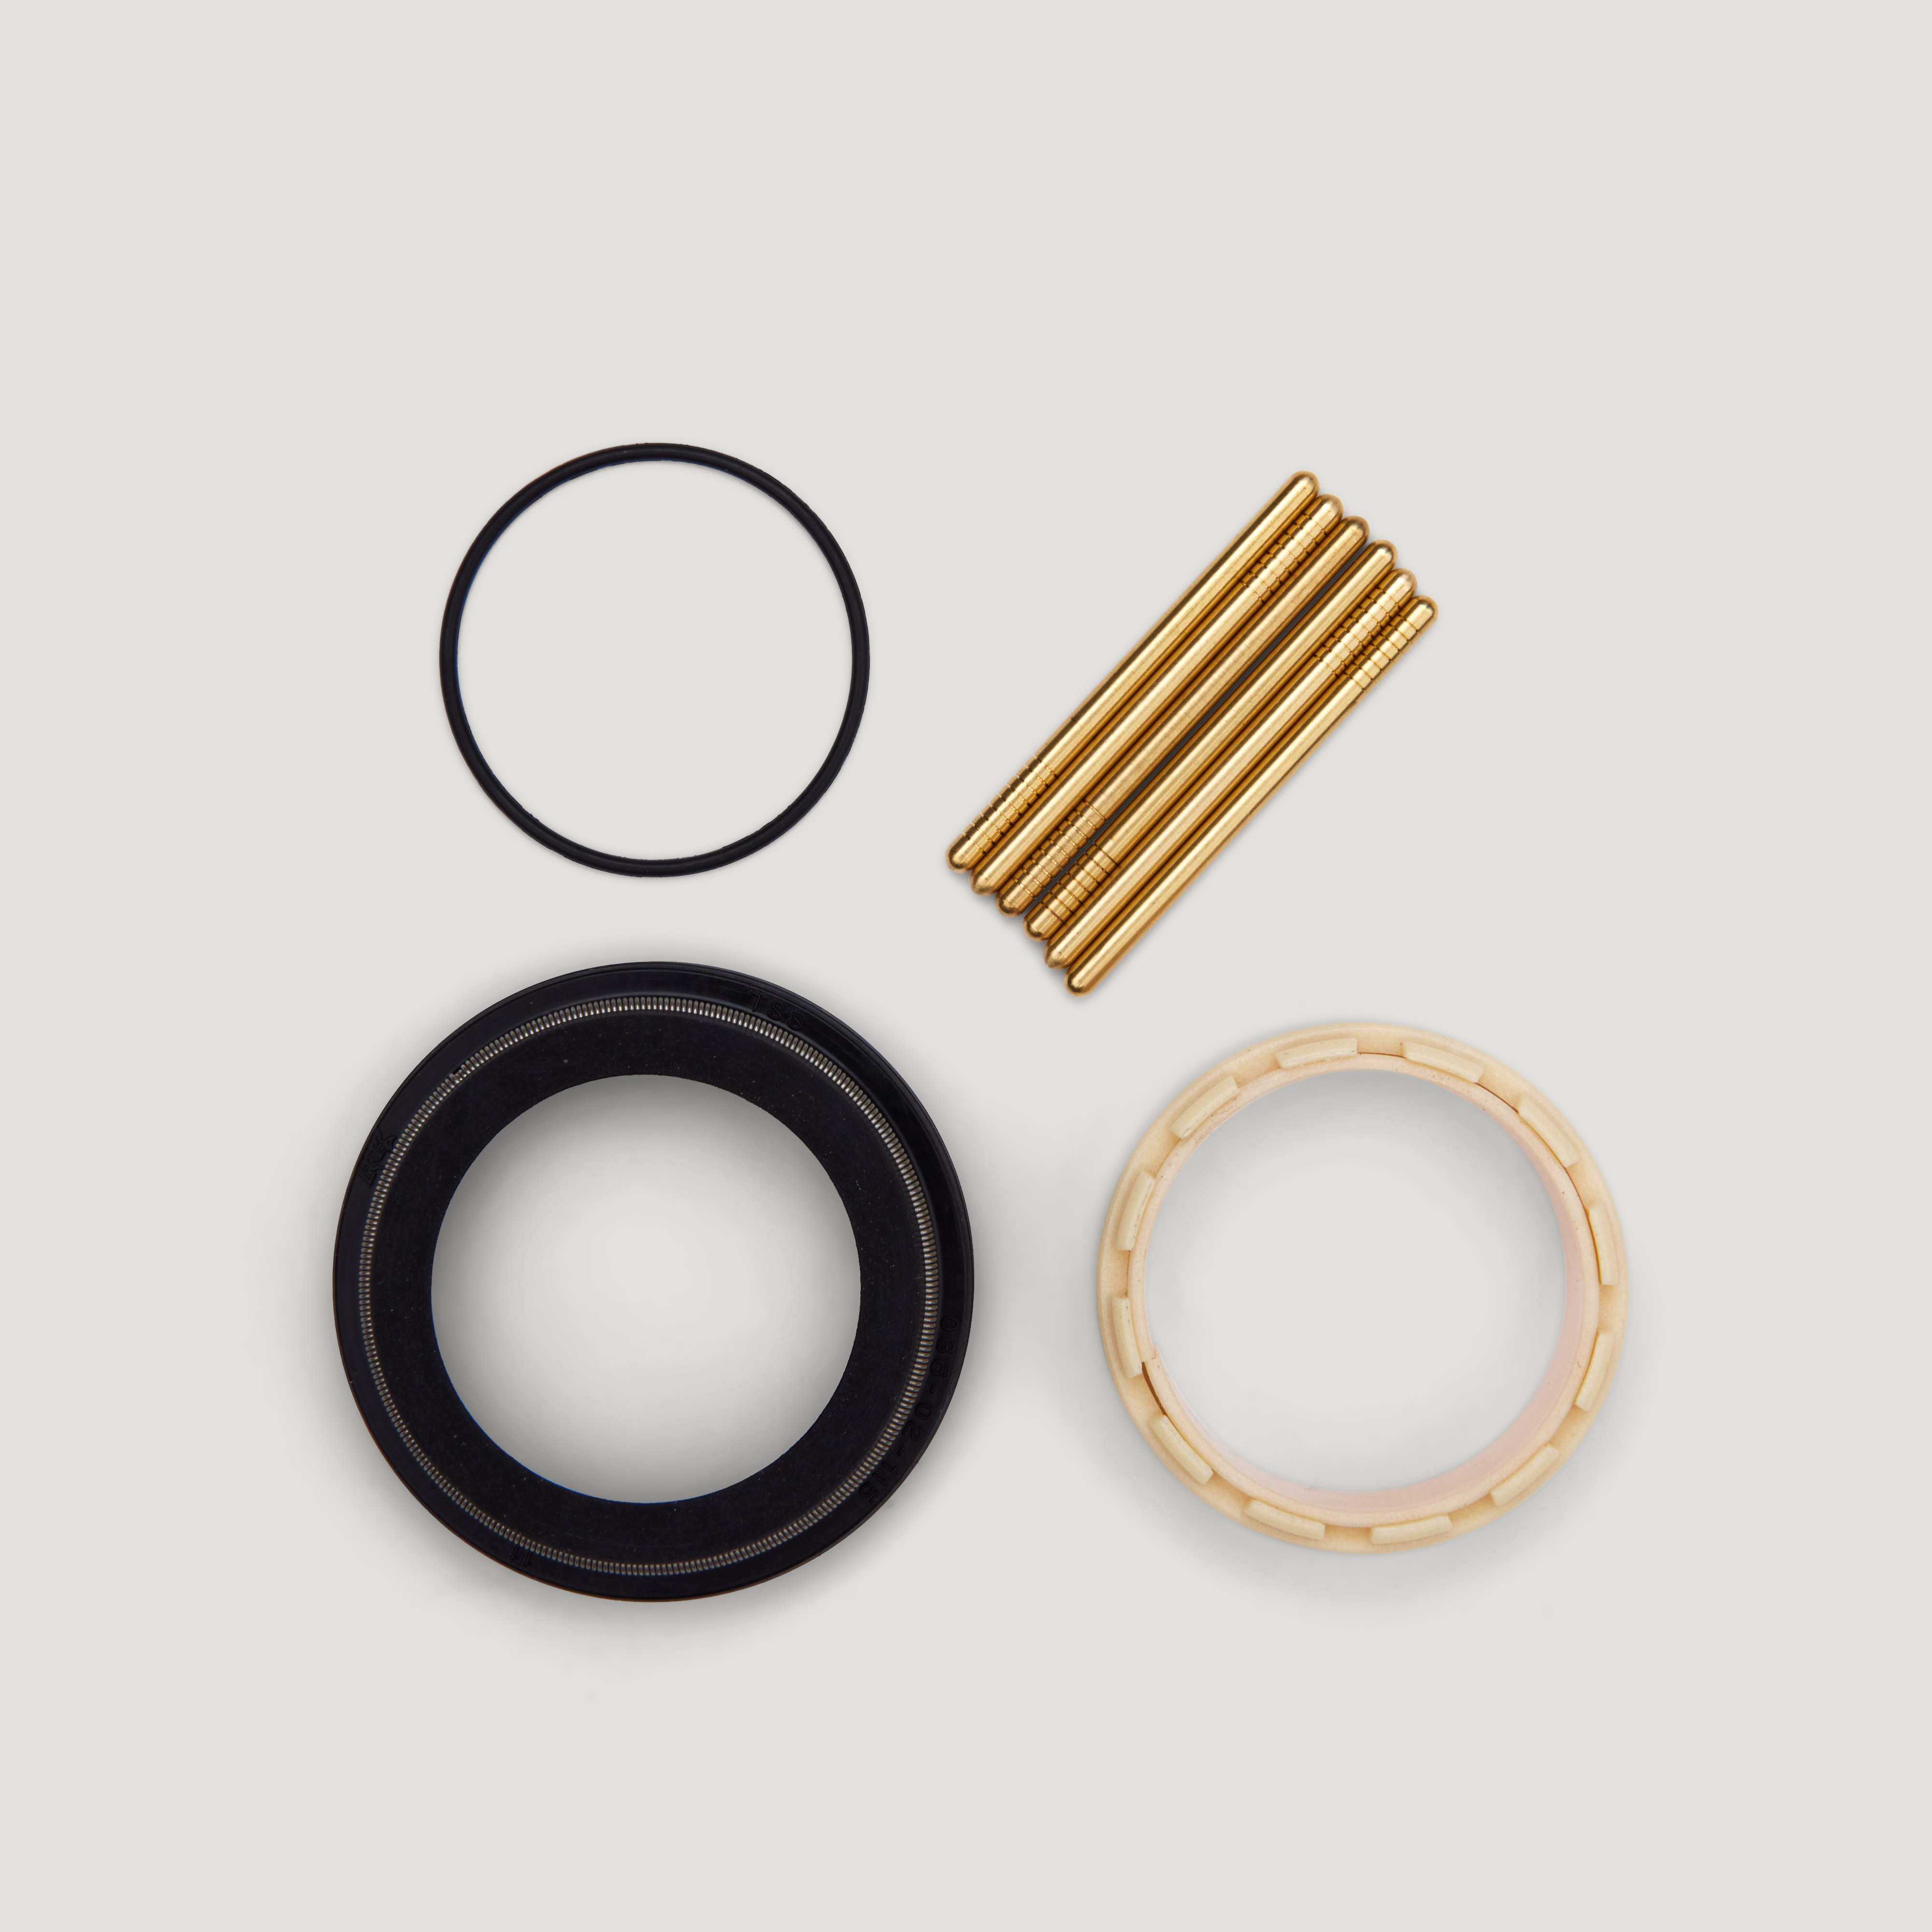 Kit: Transfer Seatpost, Bushings, Wipers, and Common Index Pins